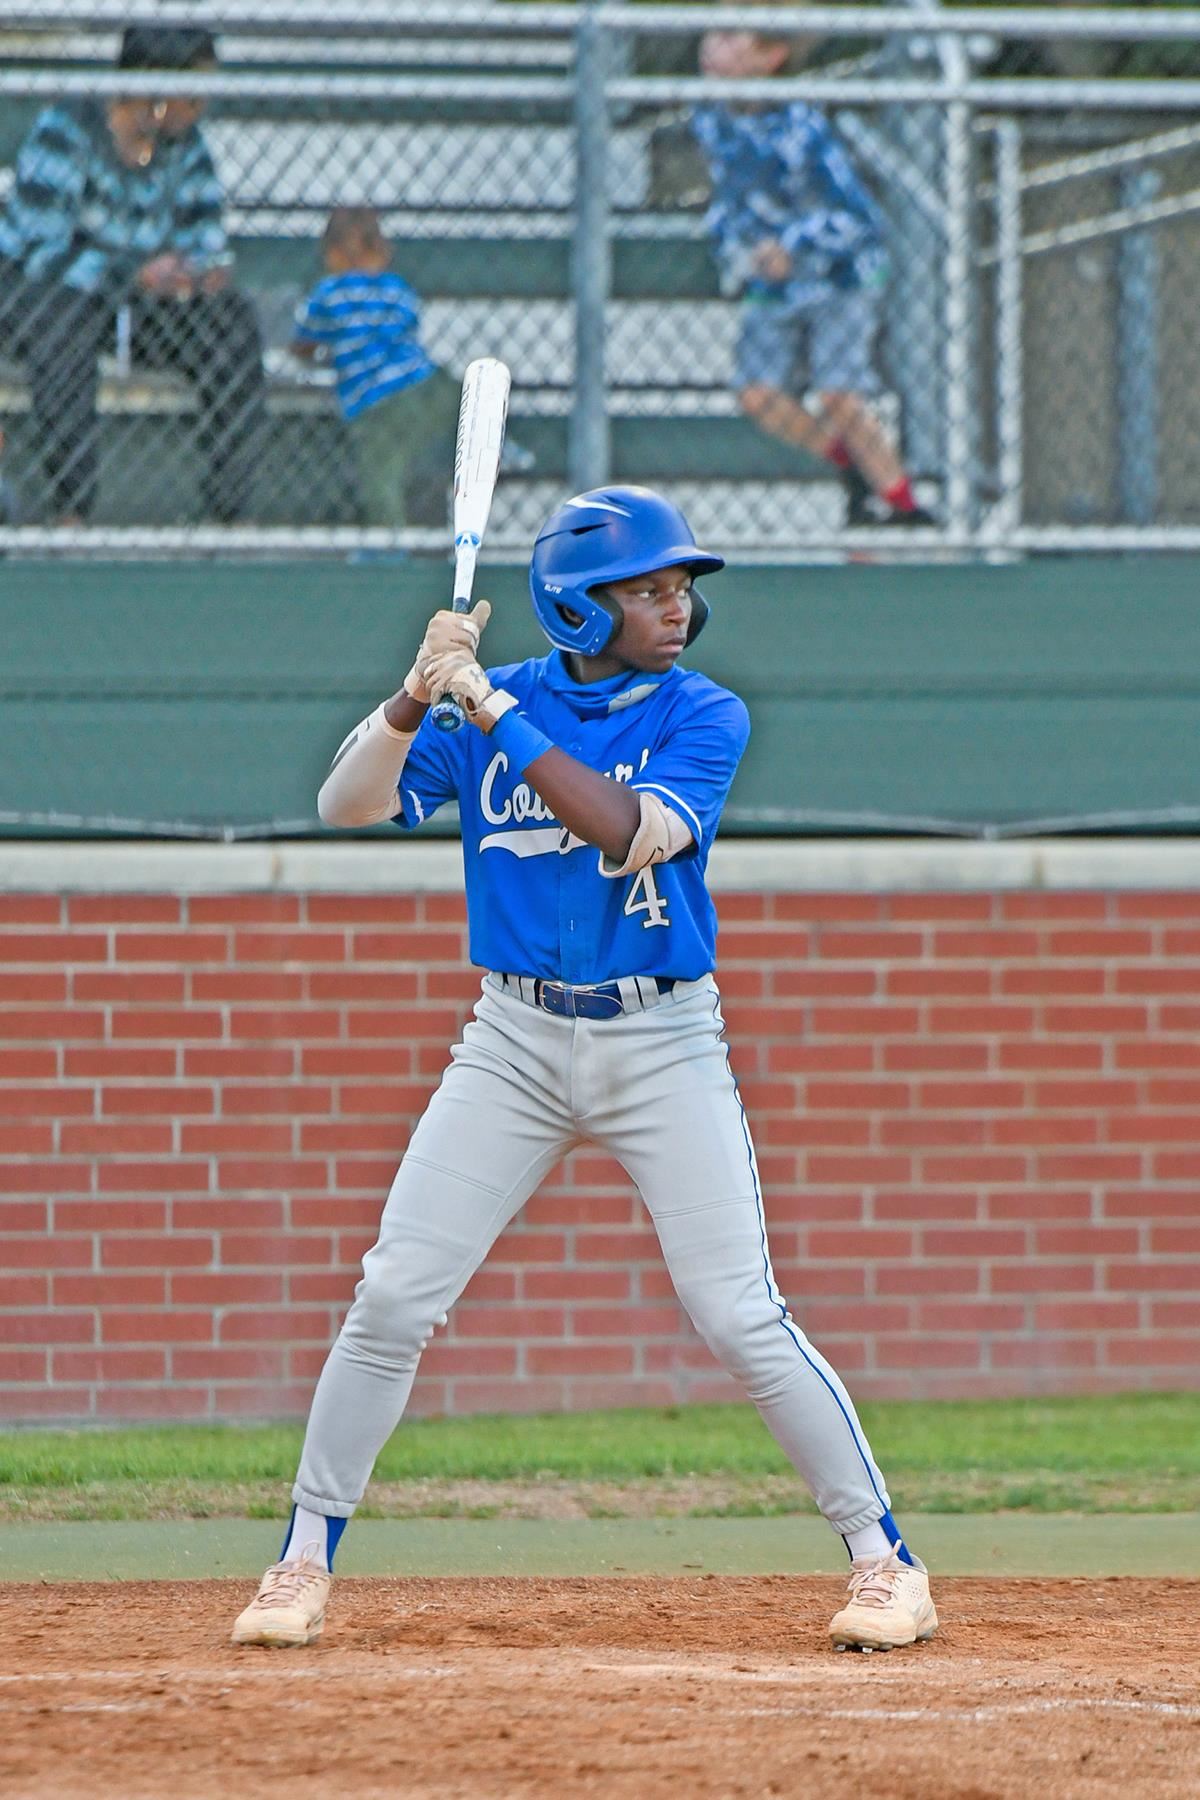 Cypress Creek High School sophomore Braylon Mitchell was named to the All-District 17-6A first team at shortstop.